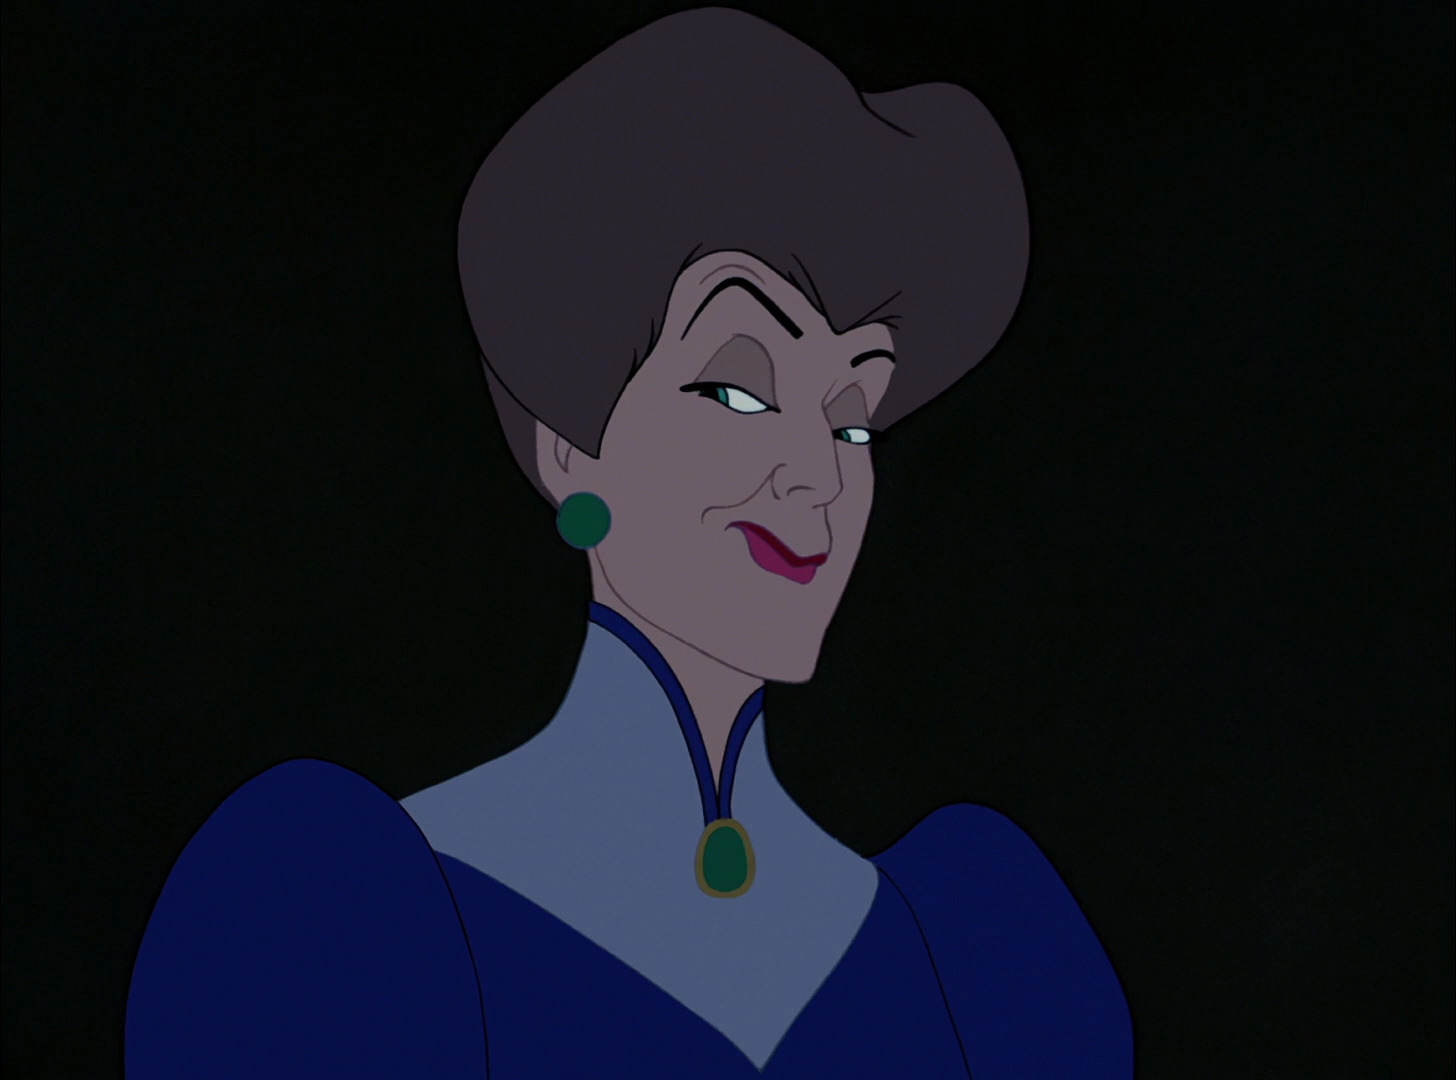 From Lady Tremaine (Cinderella) To Maleficent (Sleeping Beauty) – Disney  Villains Who Weren't Totally Evil